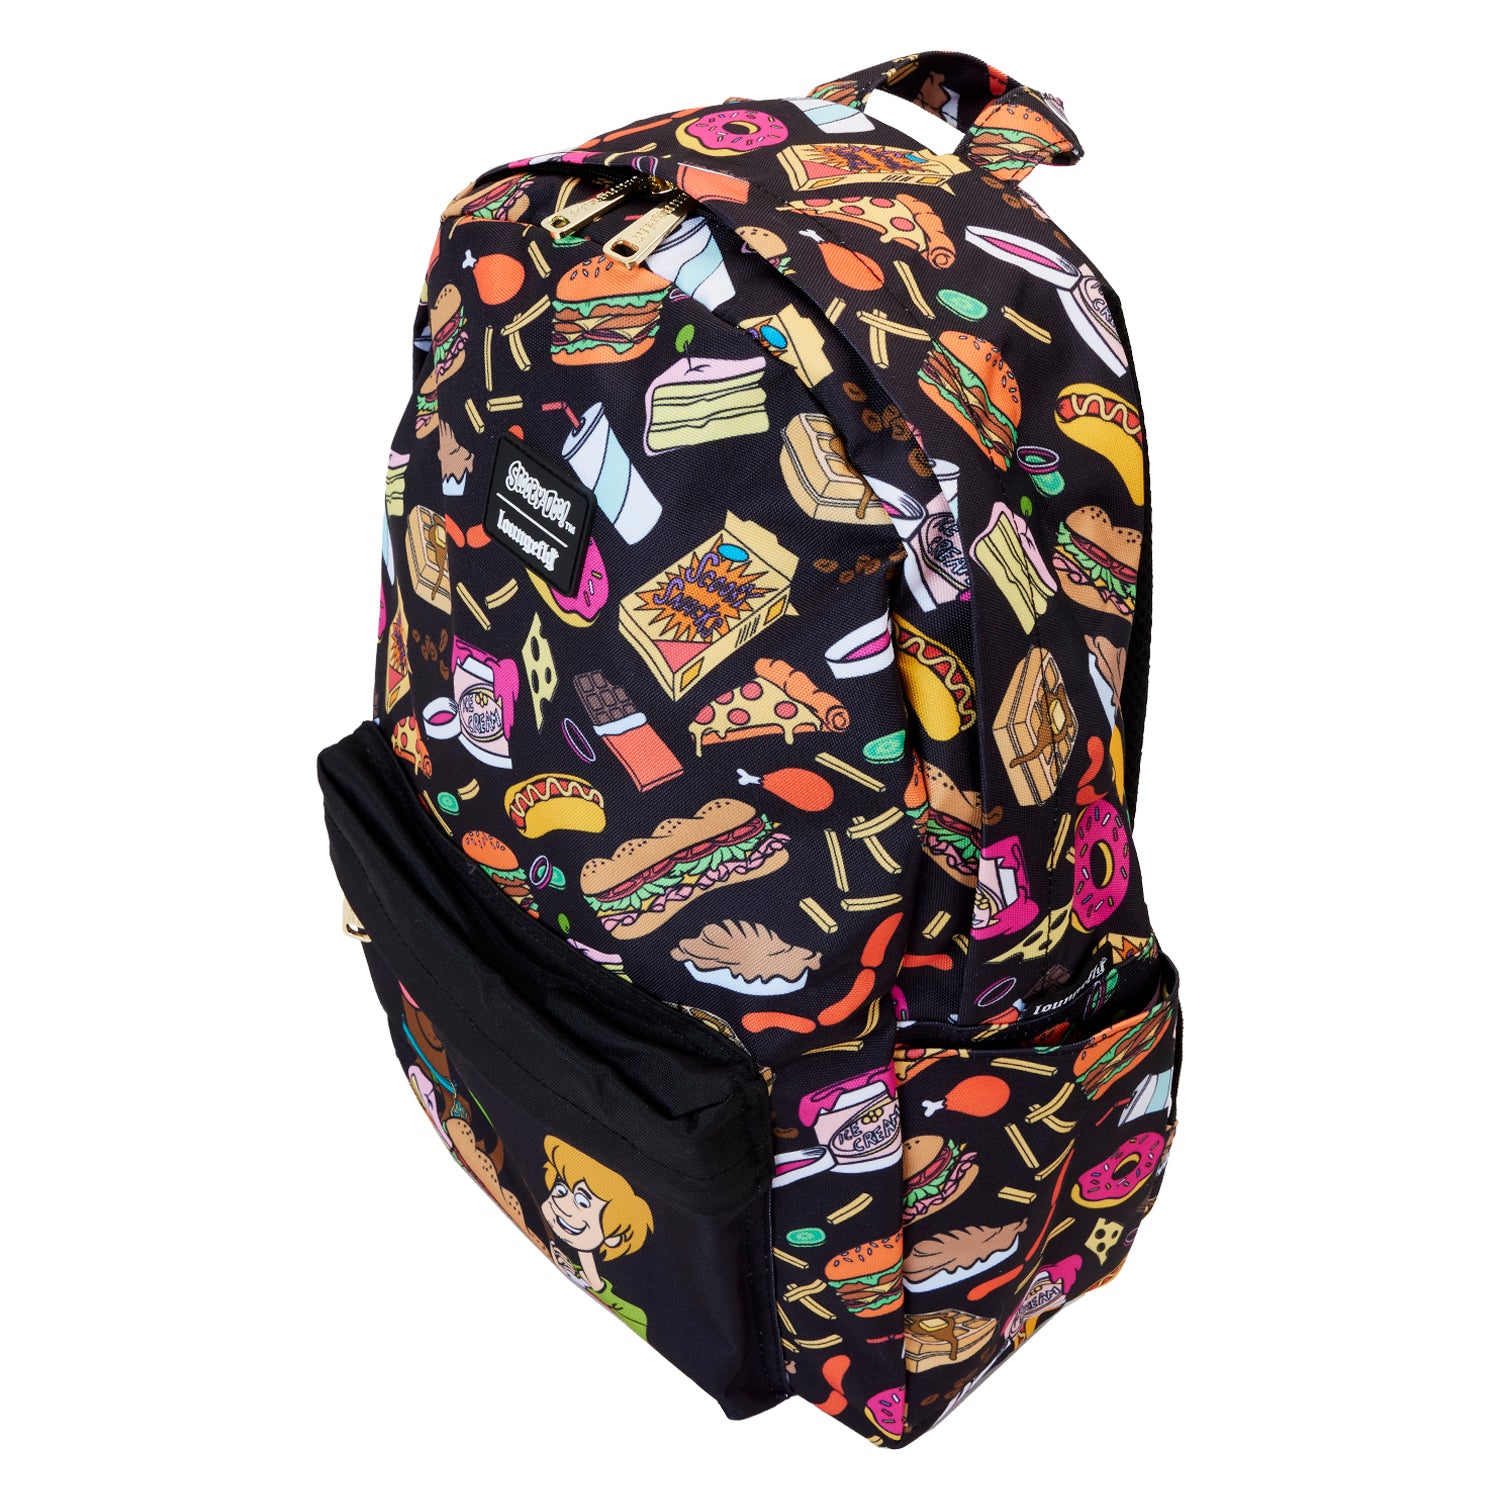 Loungefly WB Scooby-Doo Munchies AOP Full-Size Nylon Backpack 